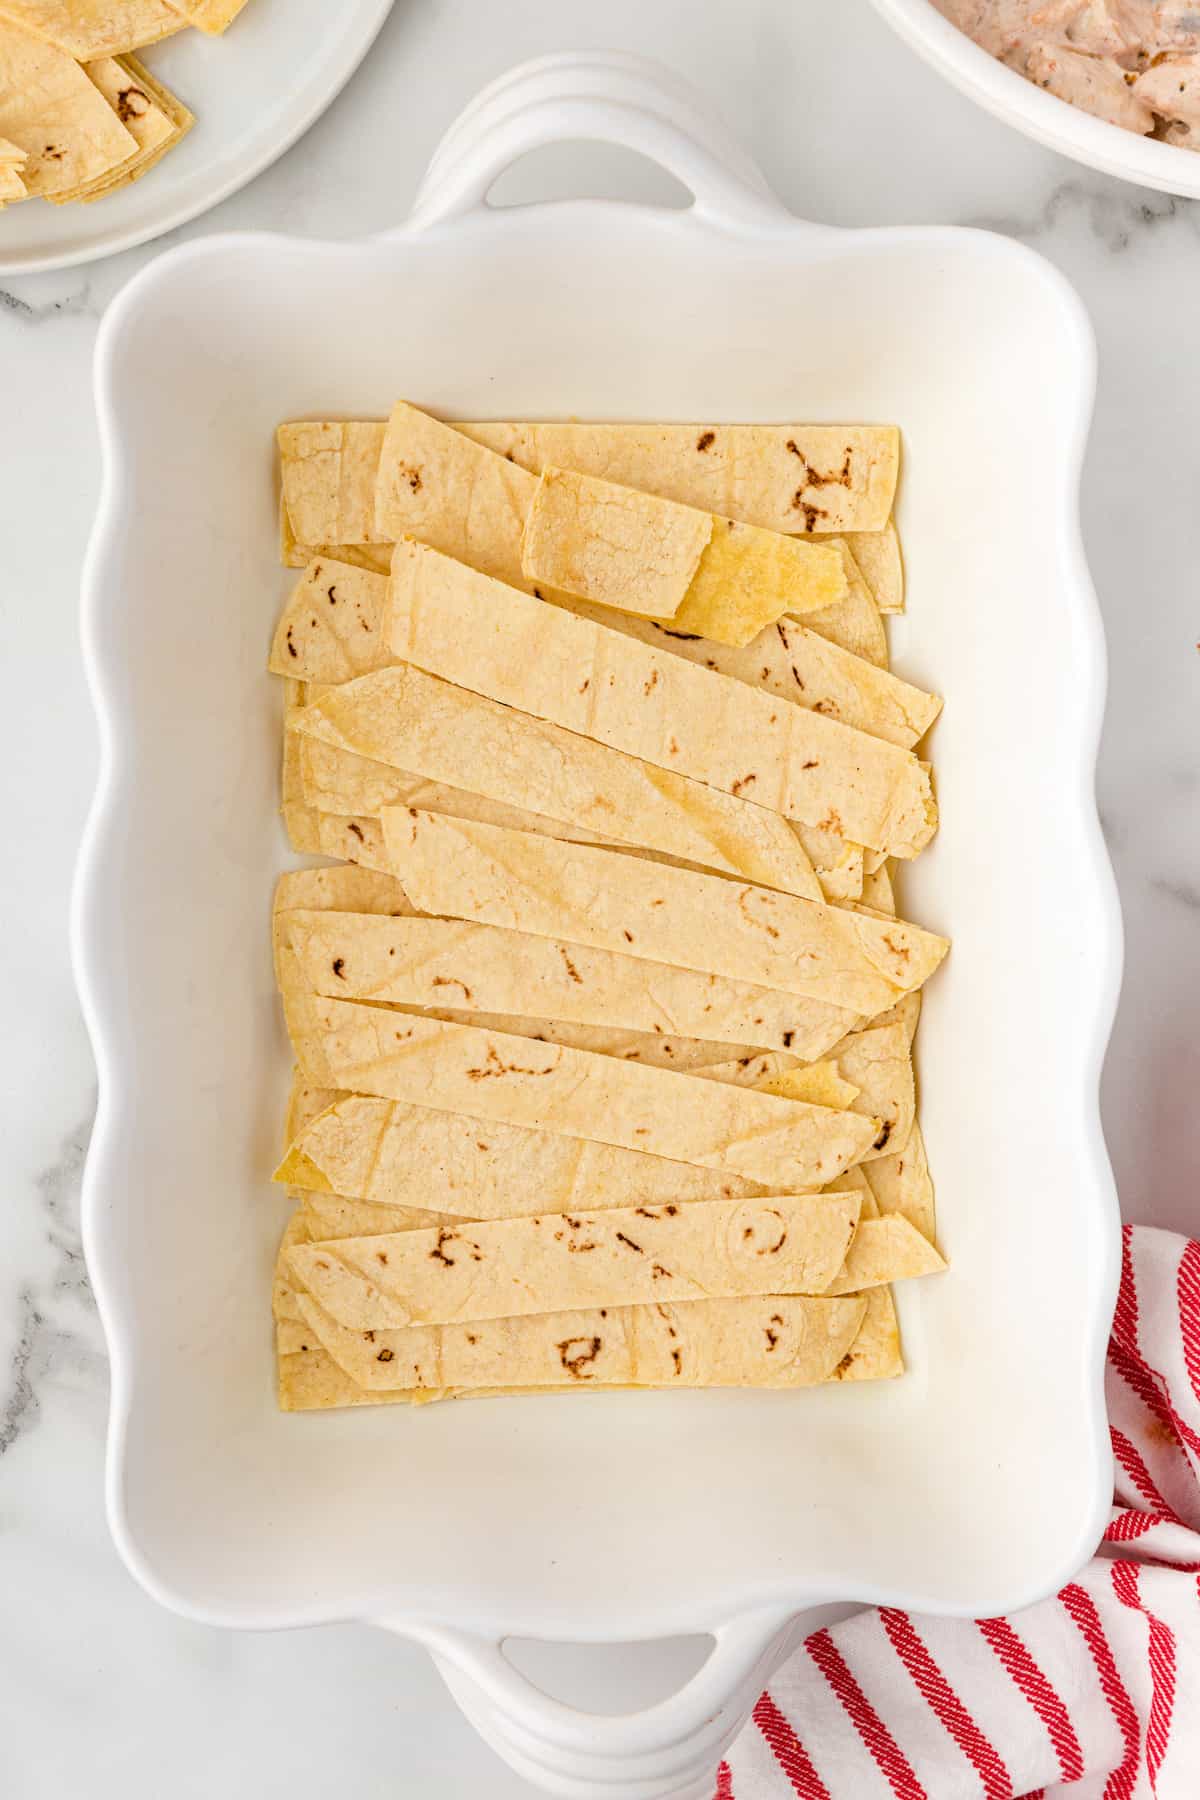 layer the tortilla strips in the bottom of the casserole dish